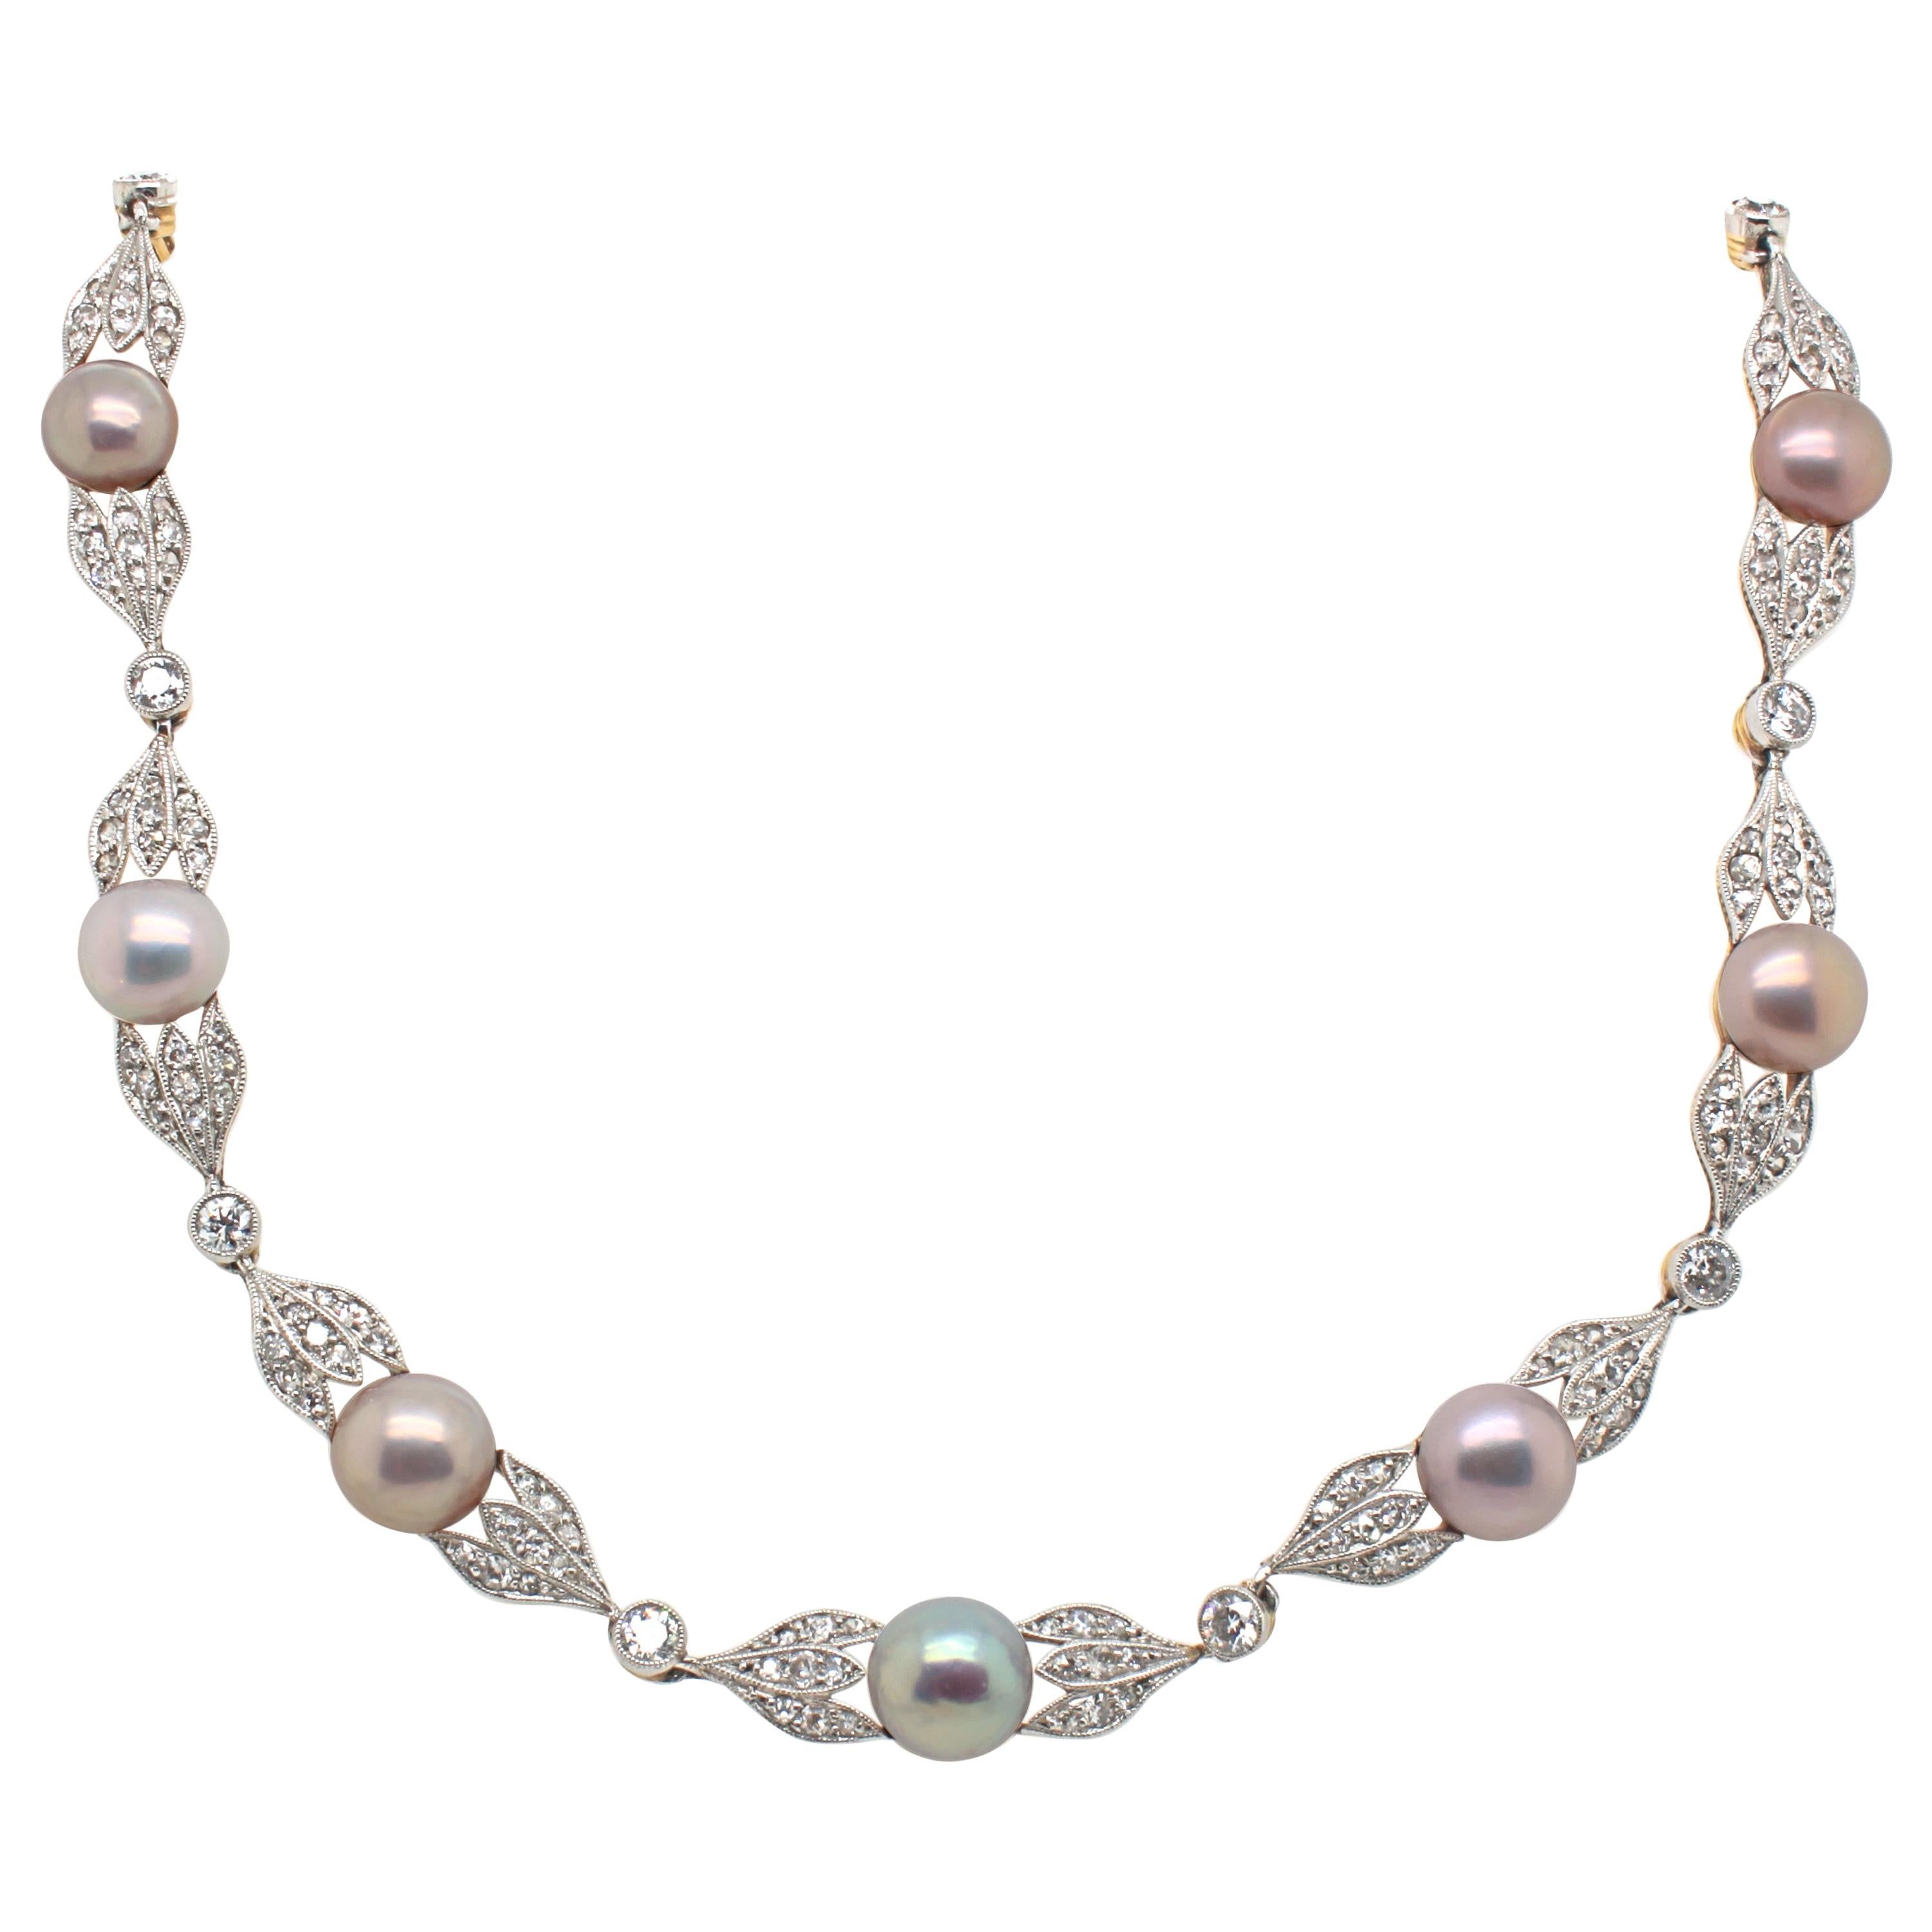 Edwardian Natural Pearl and Diamond Necklace, ca. 1900s